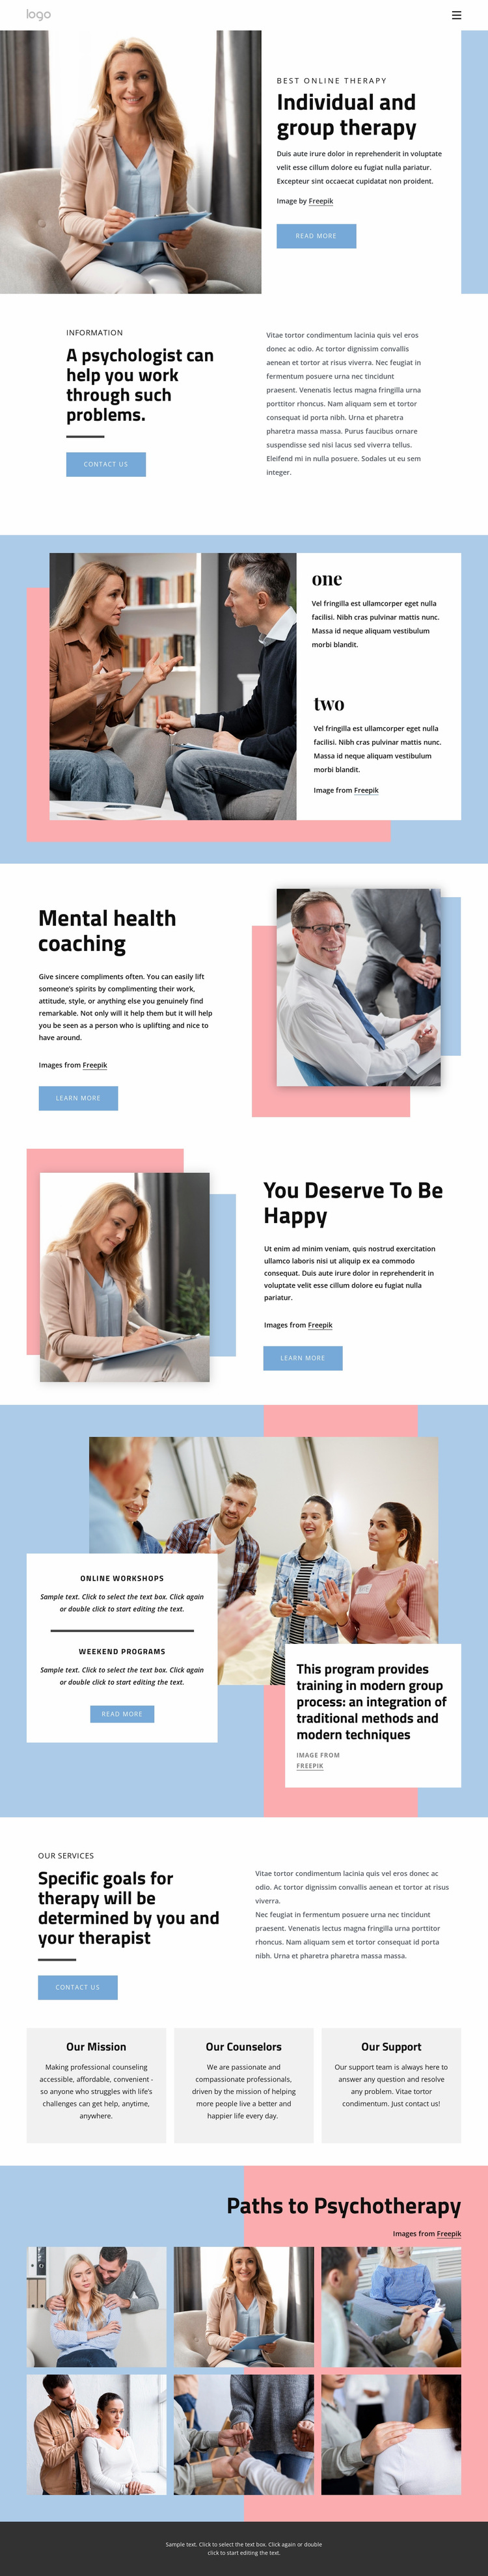 Undividual and group therapy Website Builder Templates